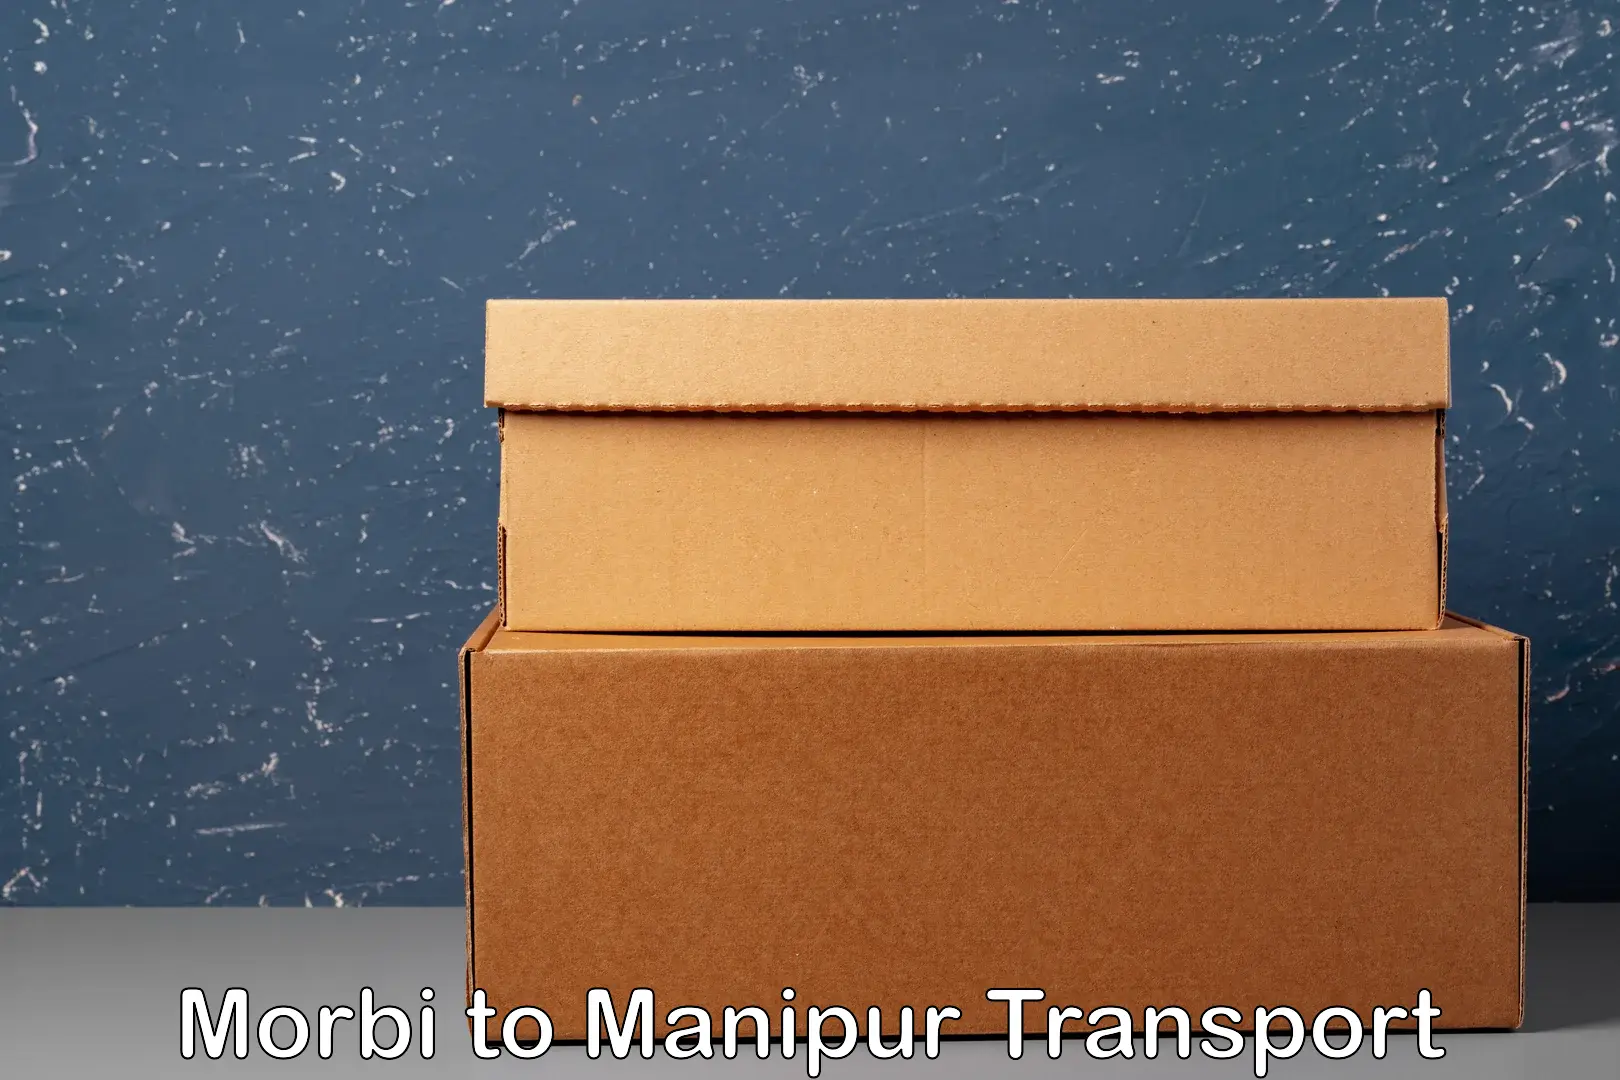 Transport bike from one state to another Morbi to Manipur